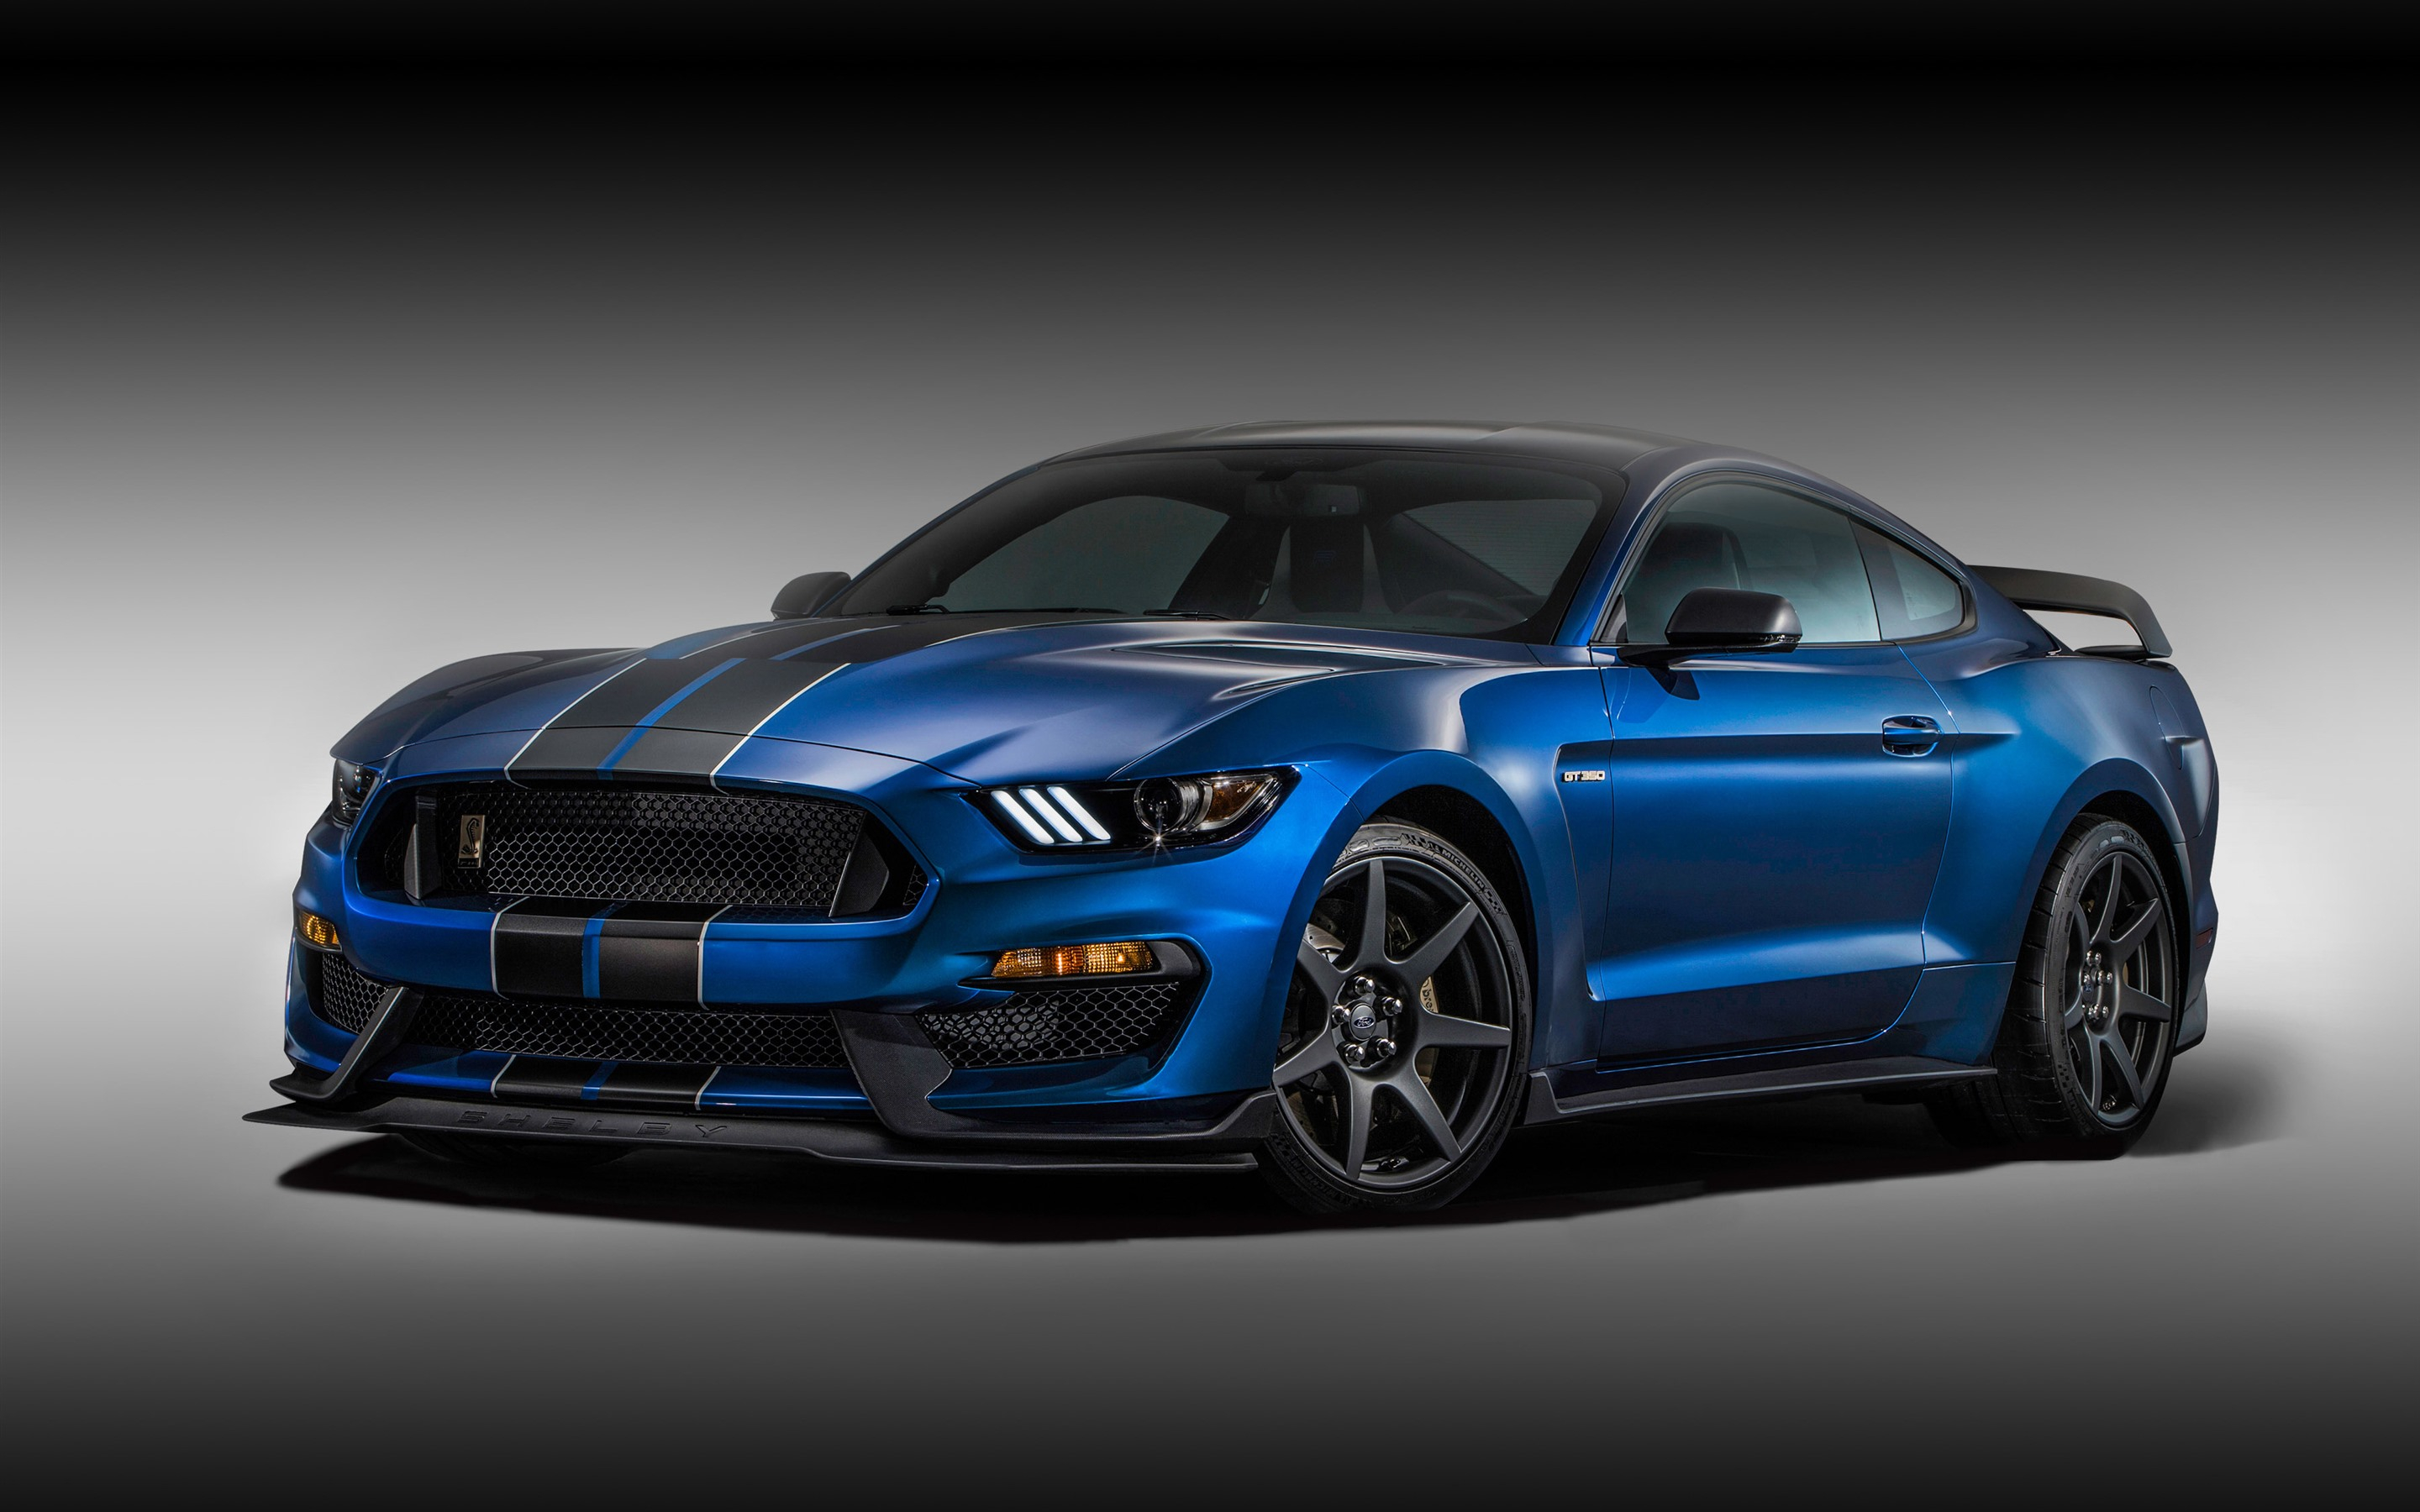 Free photo Blue ford mustang gt350r with black stripes on hood